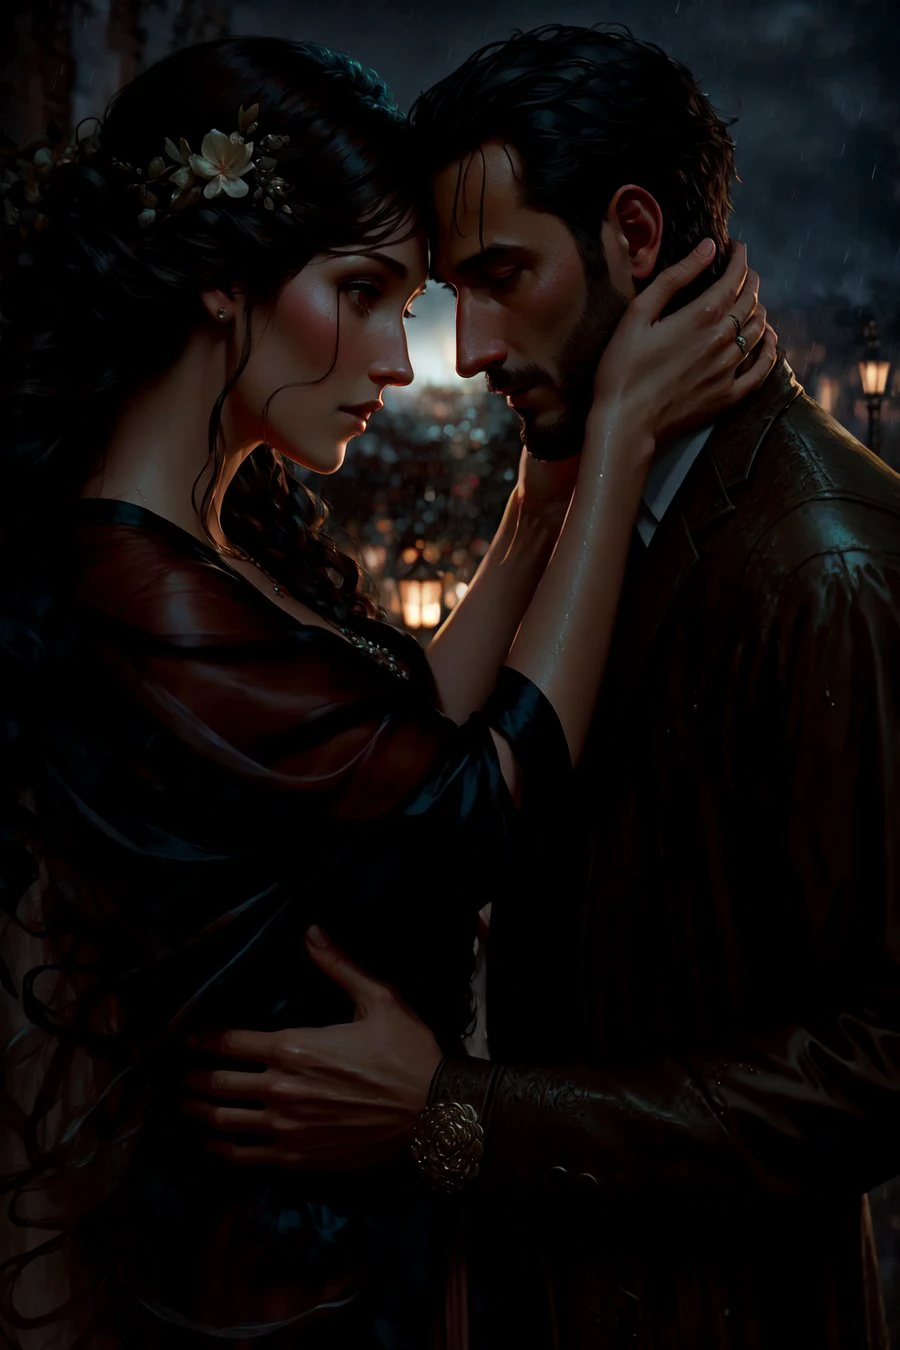 Style-FaeMagic3, (deep shadow:1.2), dark black, night, (masterpiece:1.1), high quality photo of a man and a wife embracing in the rain at (night:1.2), (up close:1.1)( high quality:1.1), gazing into each other's eyes, (romantic:1.1), (wet clothes:1.1), wet skin, (soaked:1.1), , romance, by lee jeffries nikon d850 film stock photograph 4 kodak portra 400 camera f1.6 lens rich colors hyper realistic lifelike texture dramatic lighting unreal engine trending on artstation cinestill 800, deeply in love, embracing, long hair,  evelynnobodysd15,  John Constable, Ed Blinkey, Atey Ghailan, Studio Ghibli, by Jeremy Mann, Greg Manchess, Antonio Moro, trending on ArtStation, trending on CGSociety, wedding,